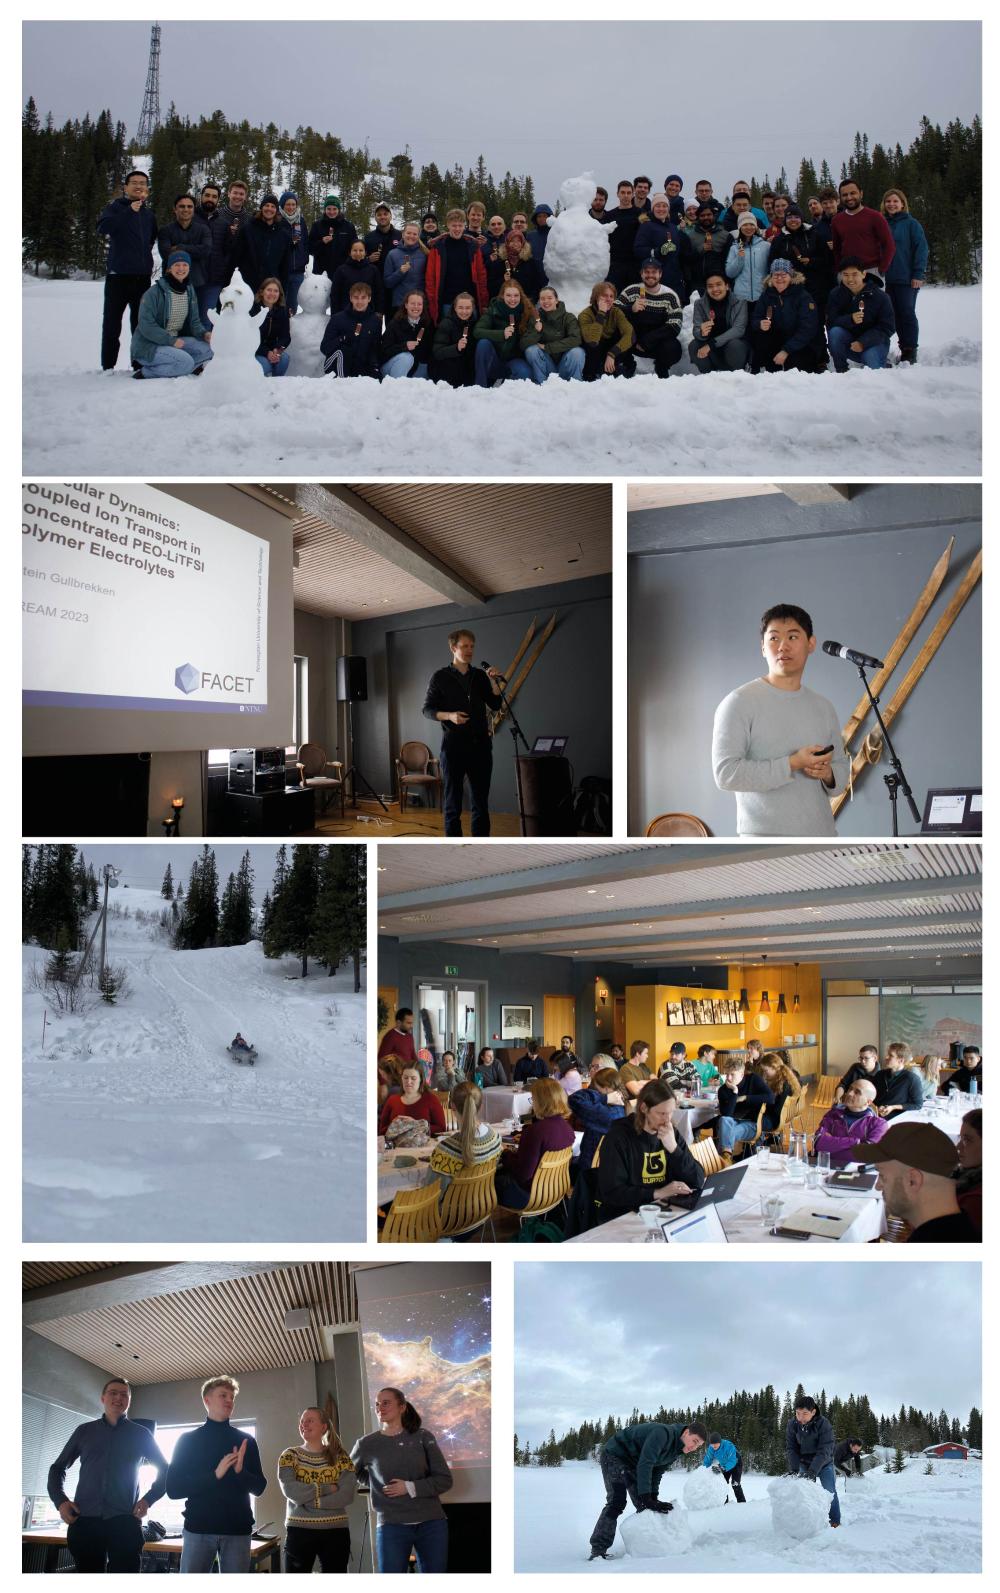 photo montage of people in the snow and presenting stuff